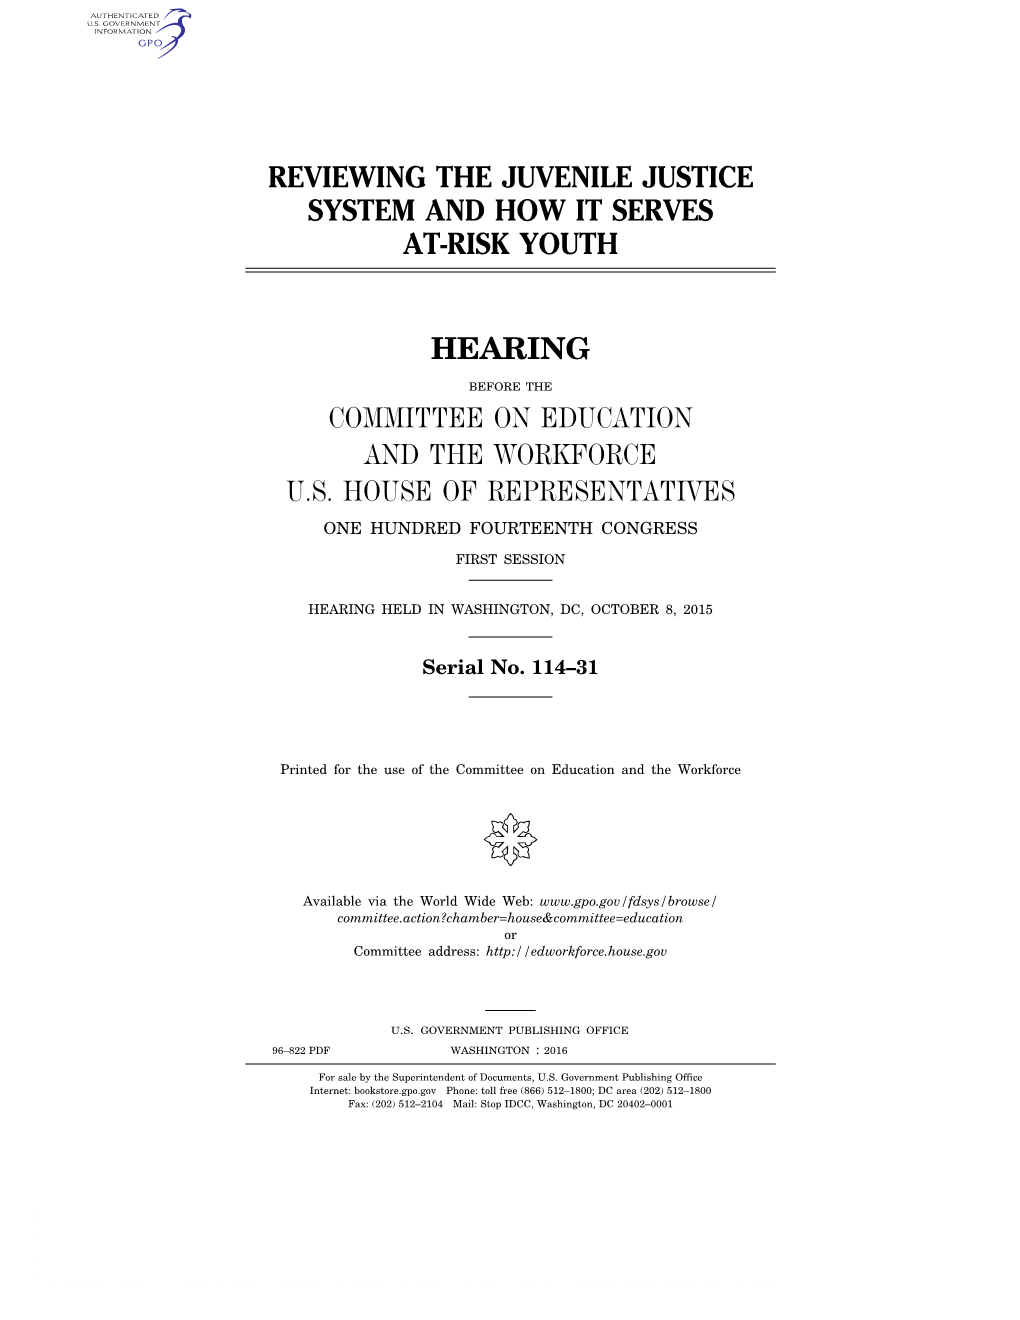 Reviewing the Juvenile Justice System and How It Serves At-Risk Youth